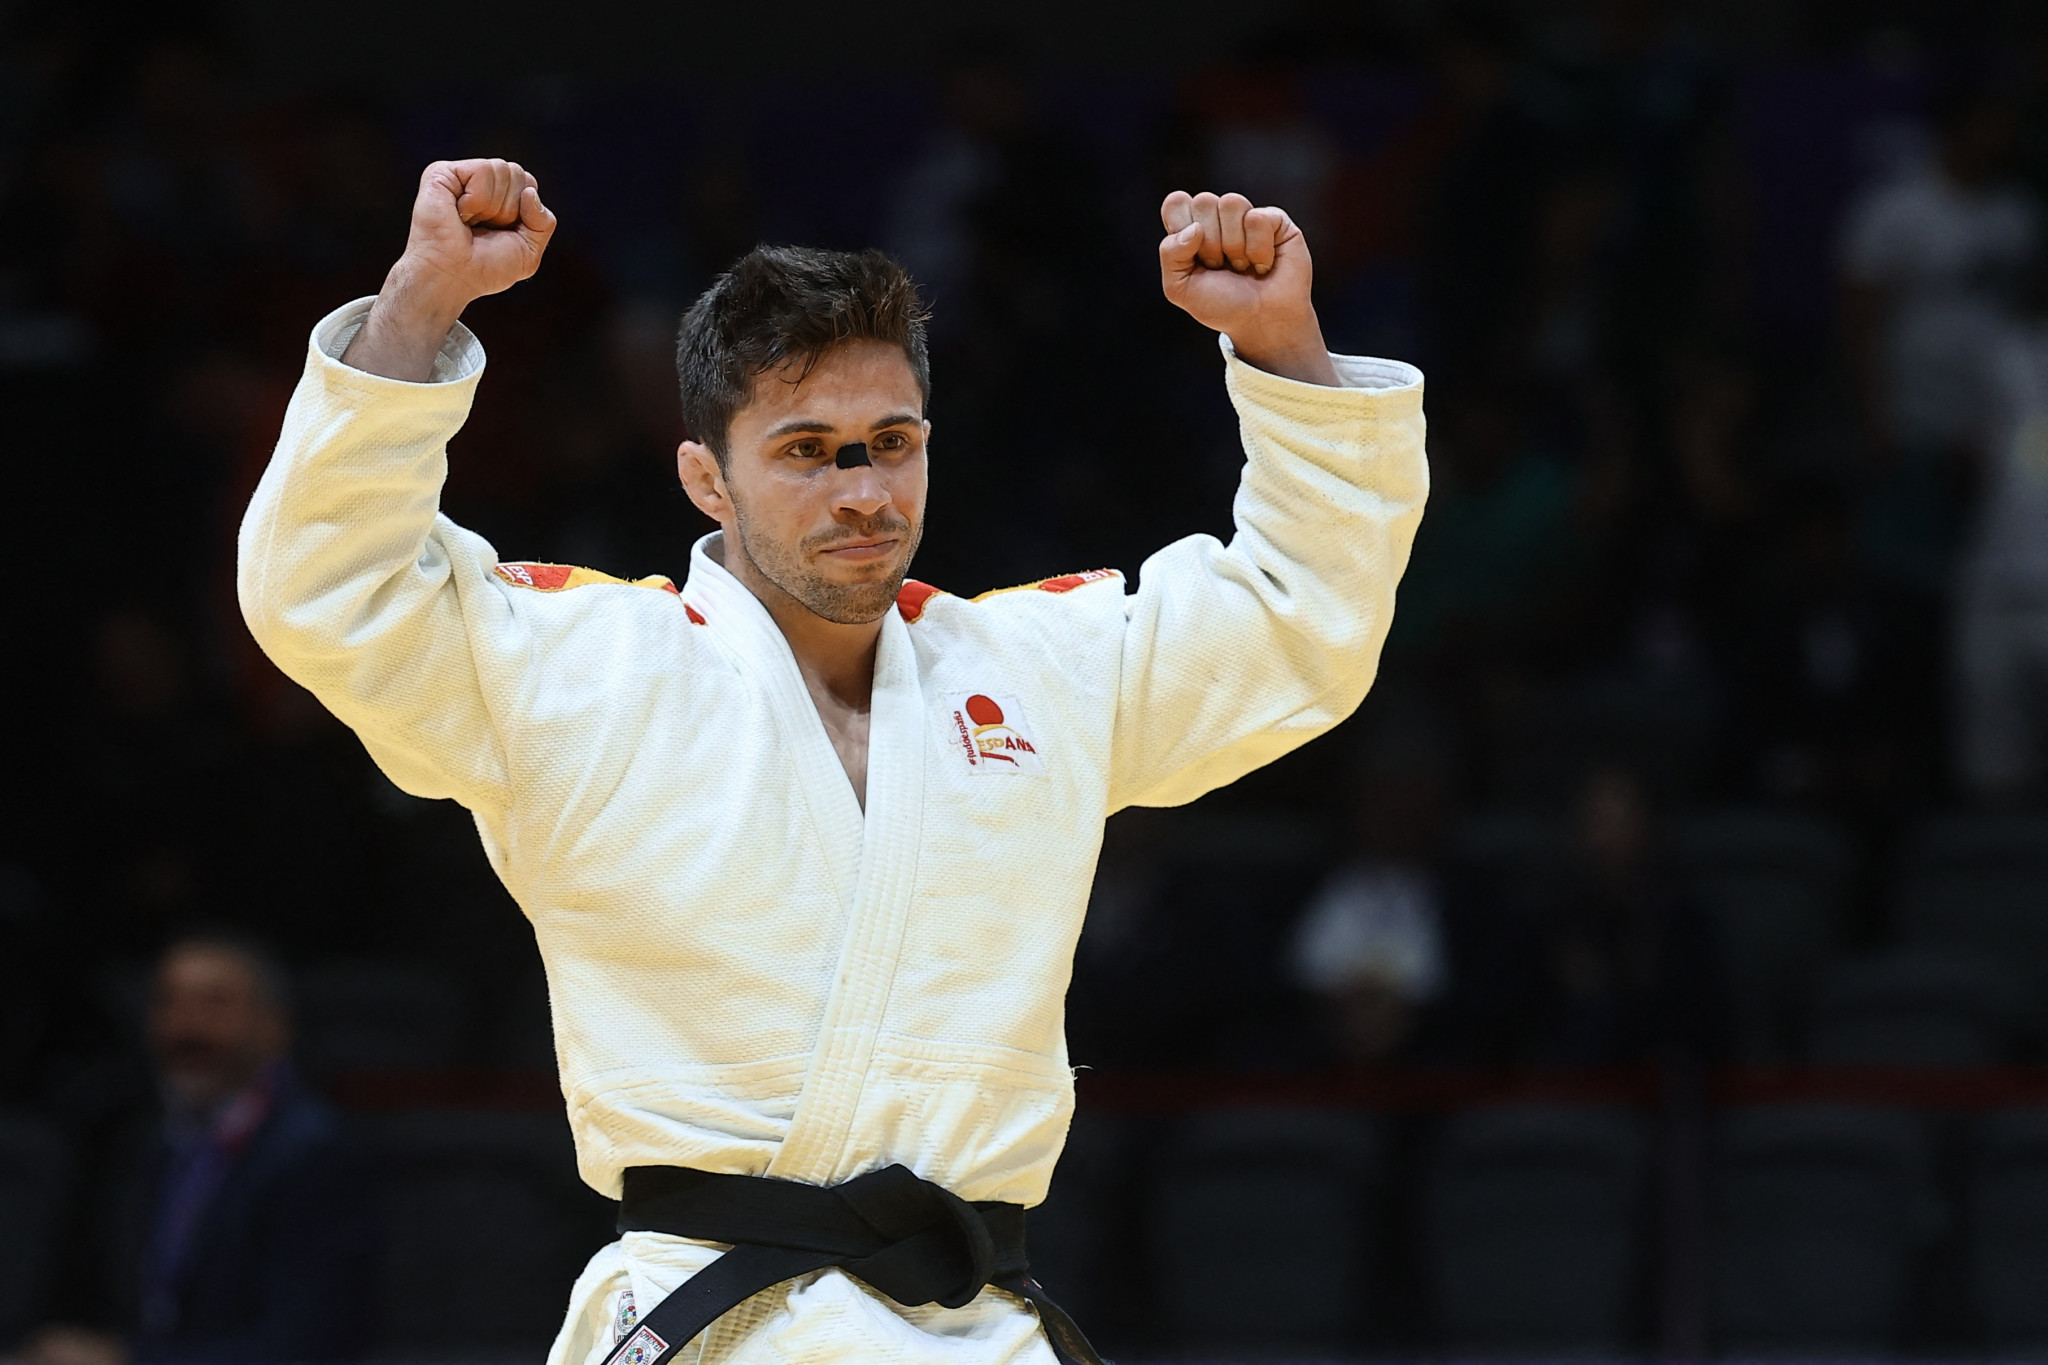 World Judo Championships begins with golds for Japan and Spain in Doha